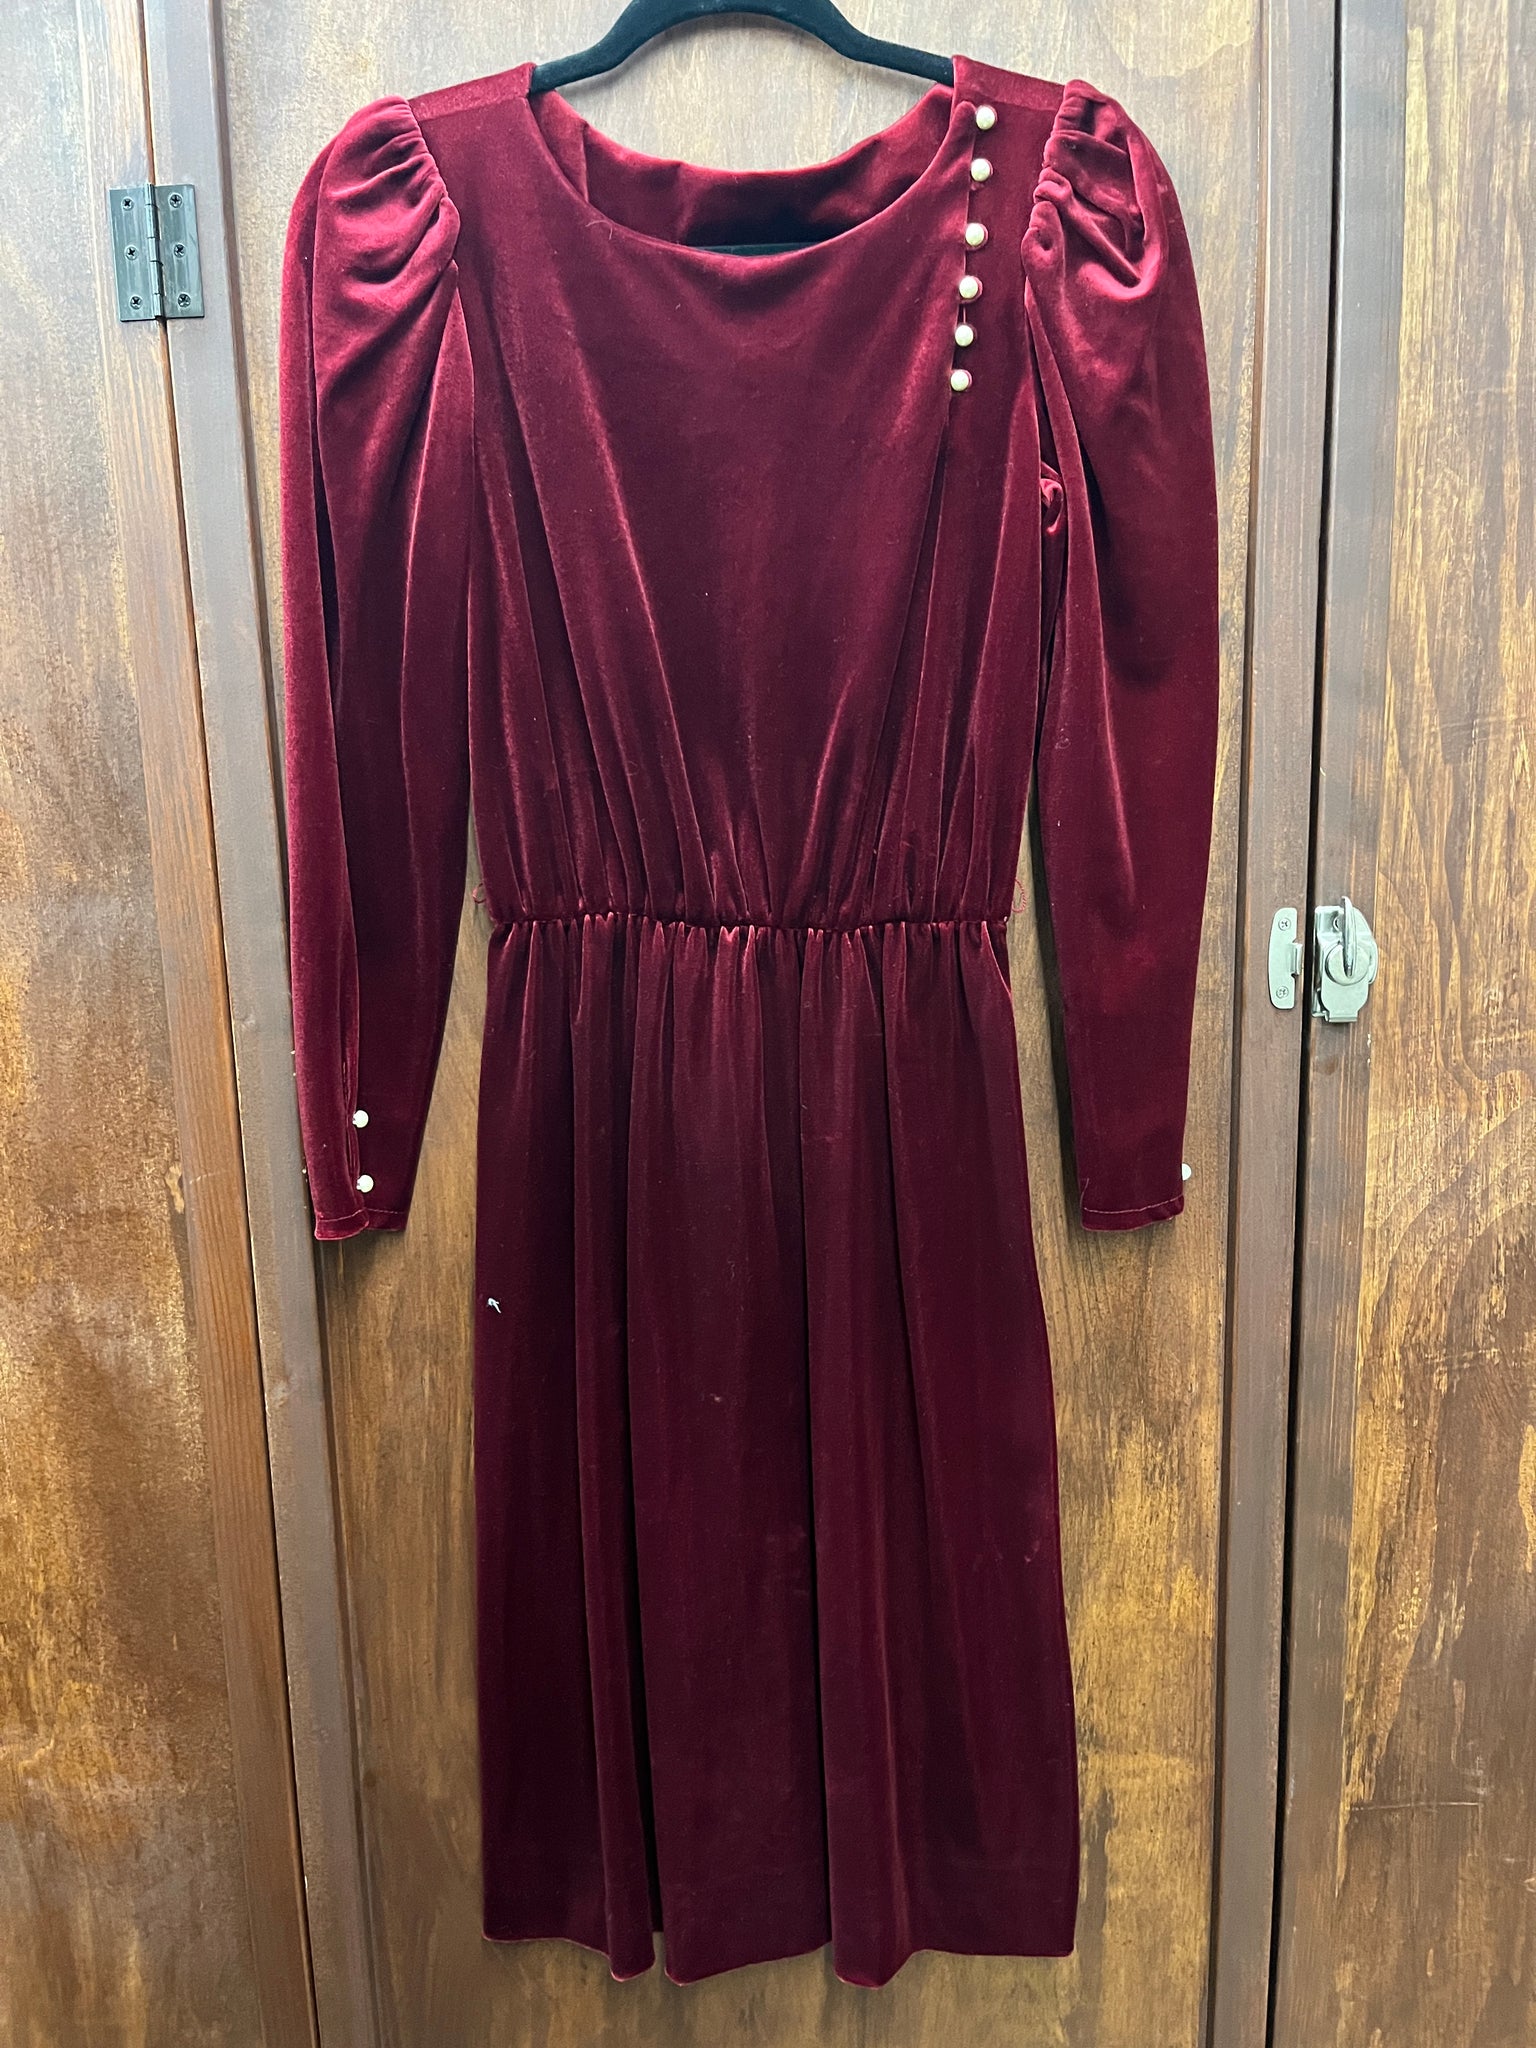 1980s DRESS-Especially Yours-burgundy velvet with pearls